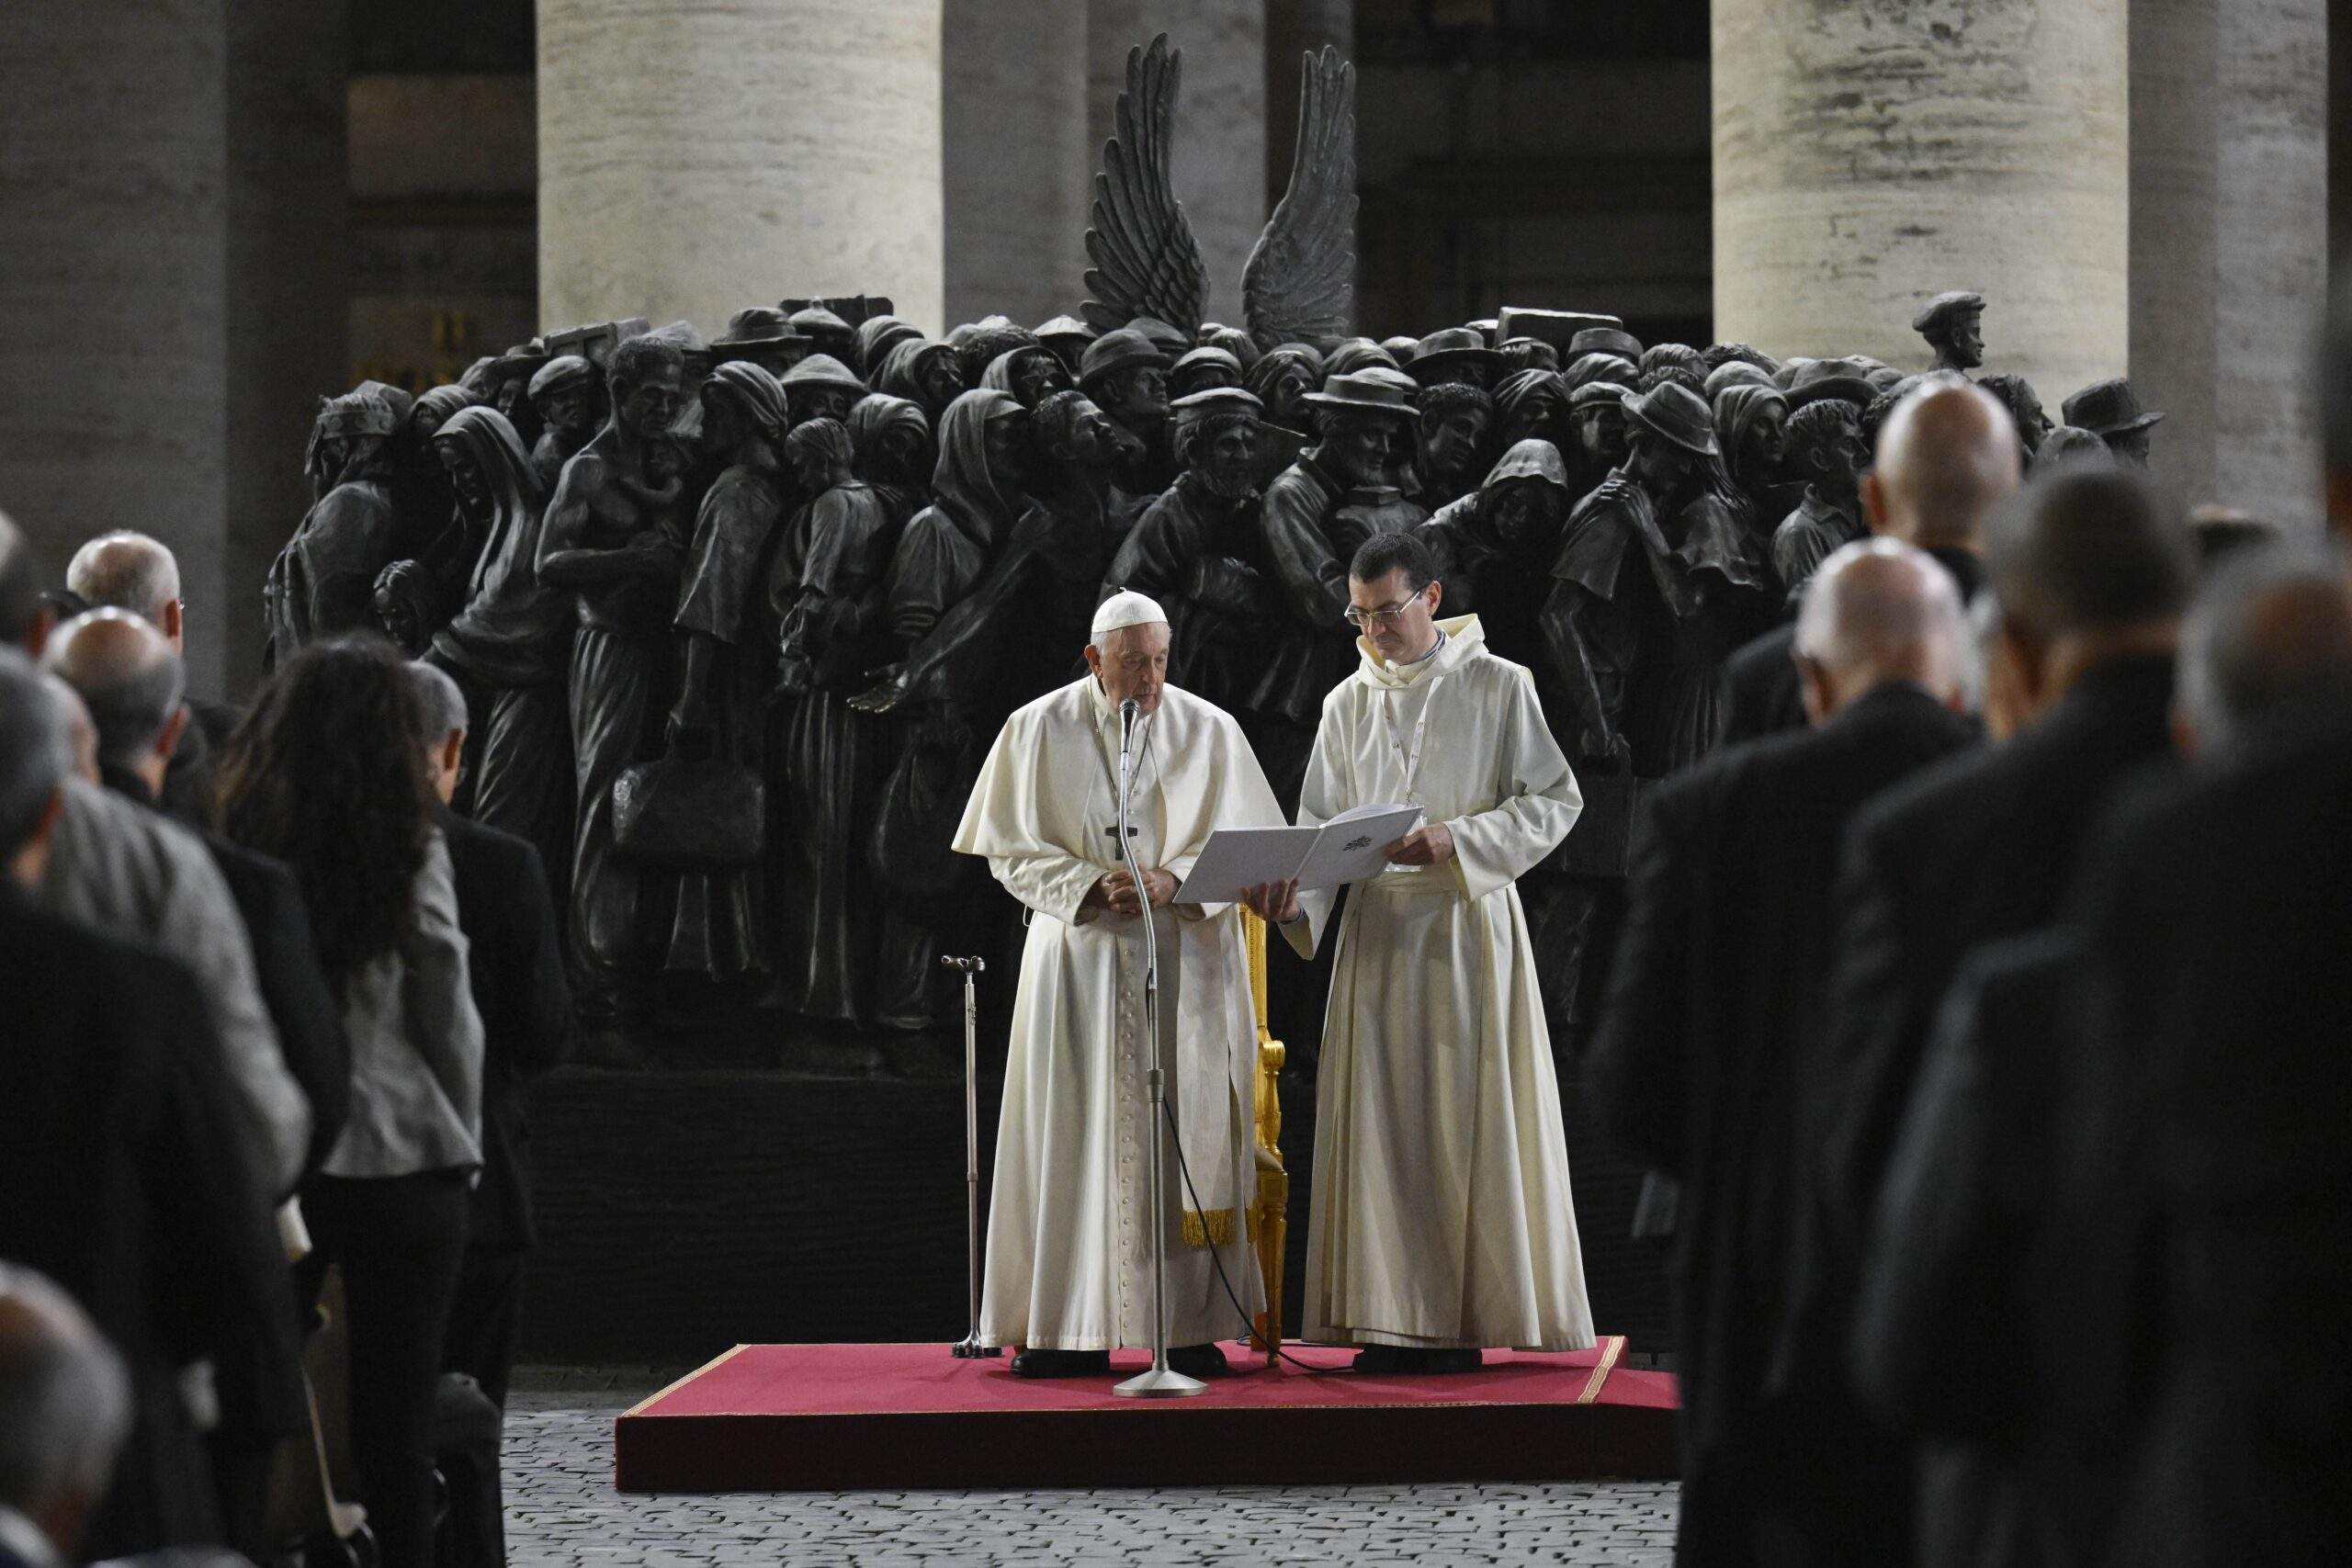 Pope Francis leads members of the assembly of the Synod of Bishops in praying for migrants and refugees in front of the statue, "Angels Unawares," in St. Peter's Square Oct. 19, 2023. The sculpture by Canadian Timothy Schmalz, depicts a boat with 140 figures of migrants from various historical periods and various nations. (CNS photo/Vatican Media)